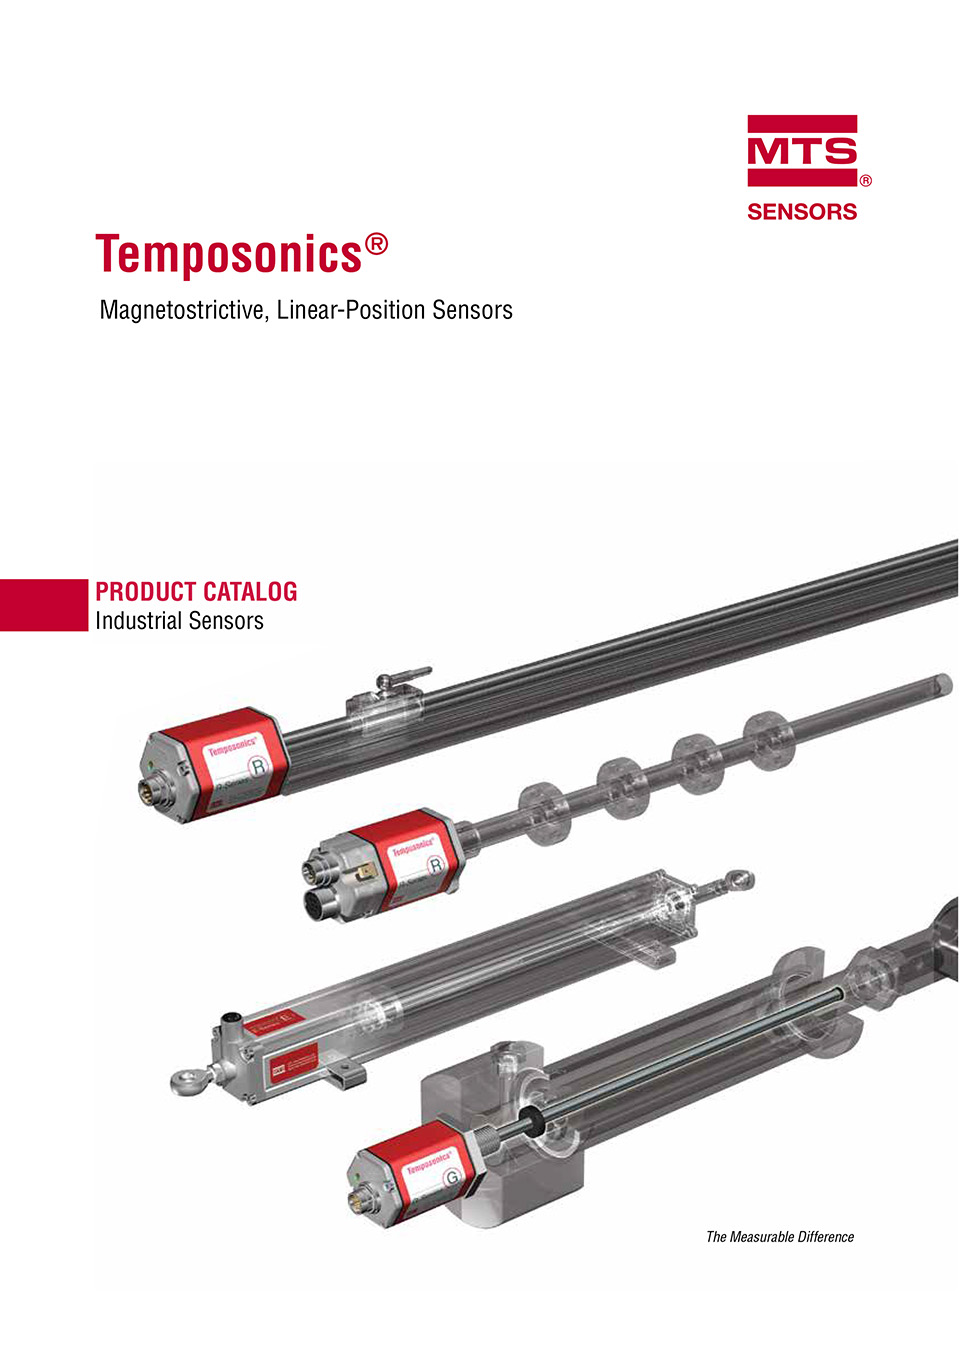 Temposonic industrial product catalog cover